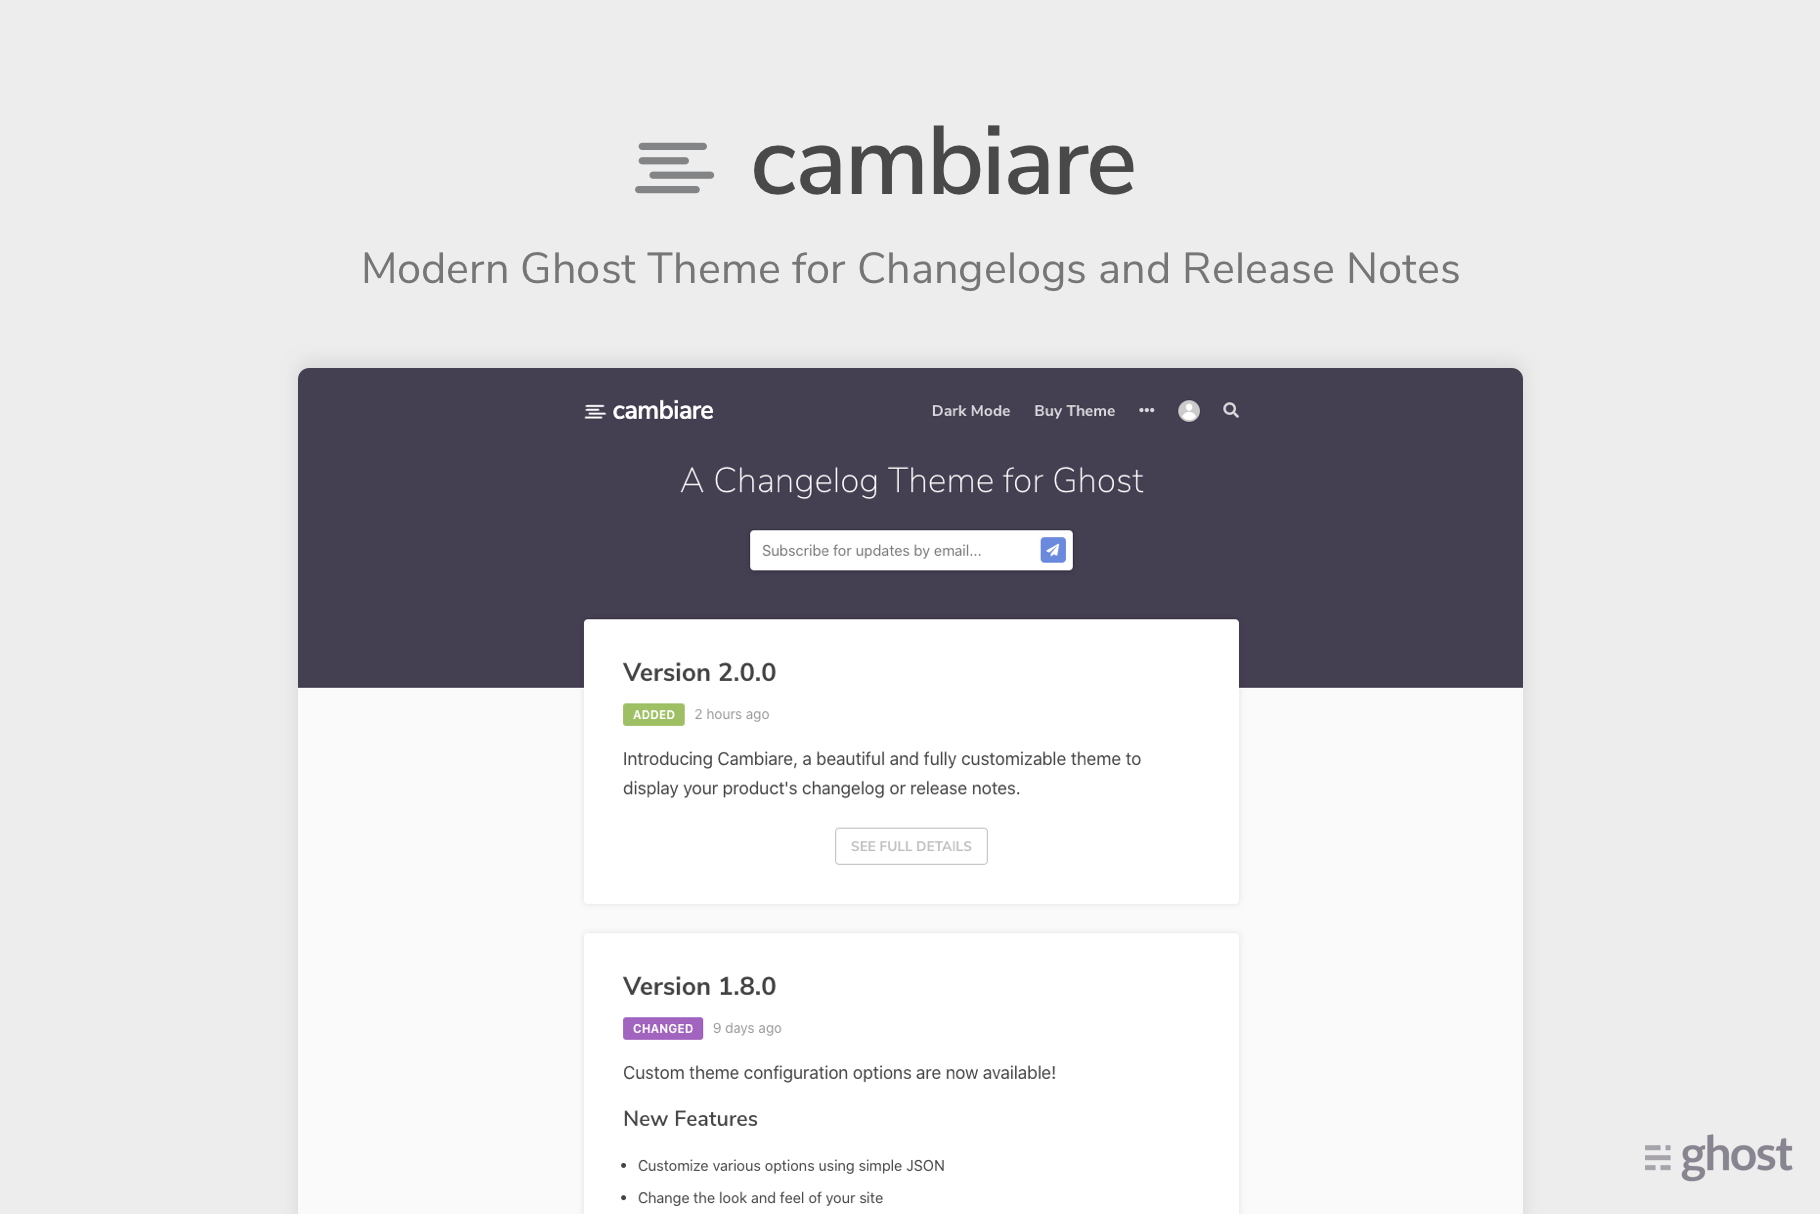 Introducing: Cambiare - A Changelog and Release Notes Theme for Ghost